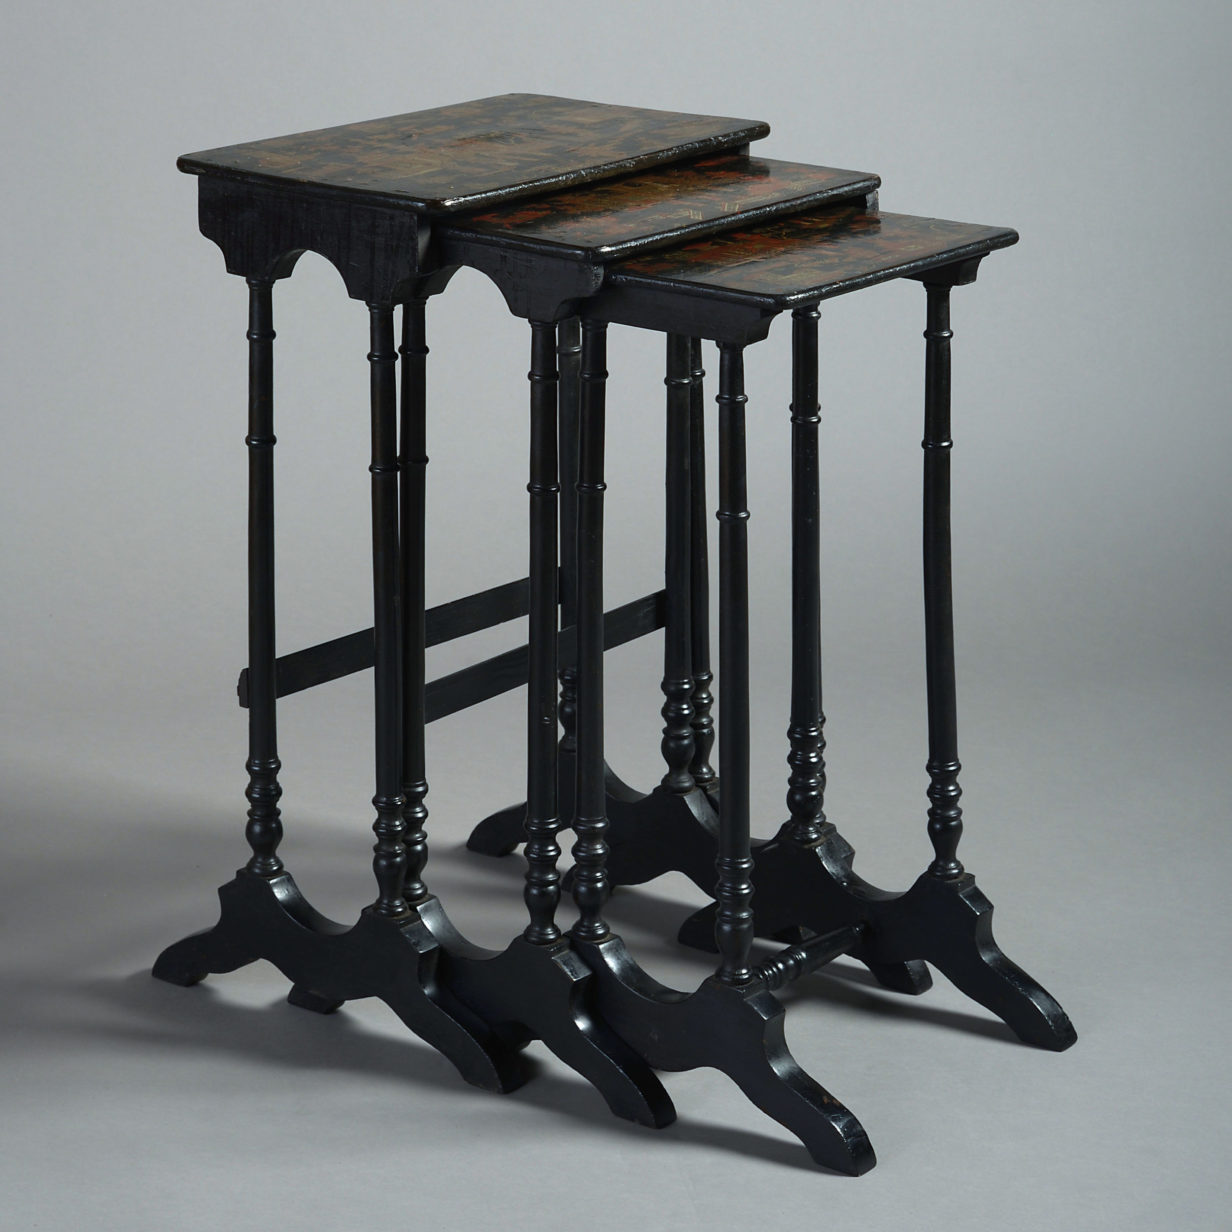 An early 19th century regency period nest of tables